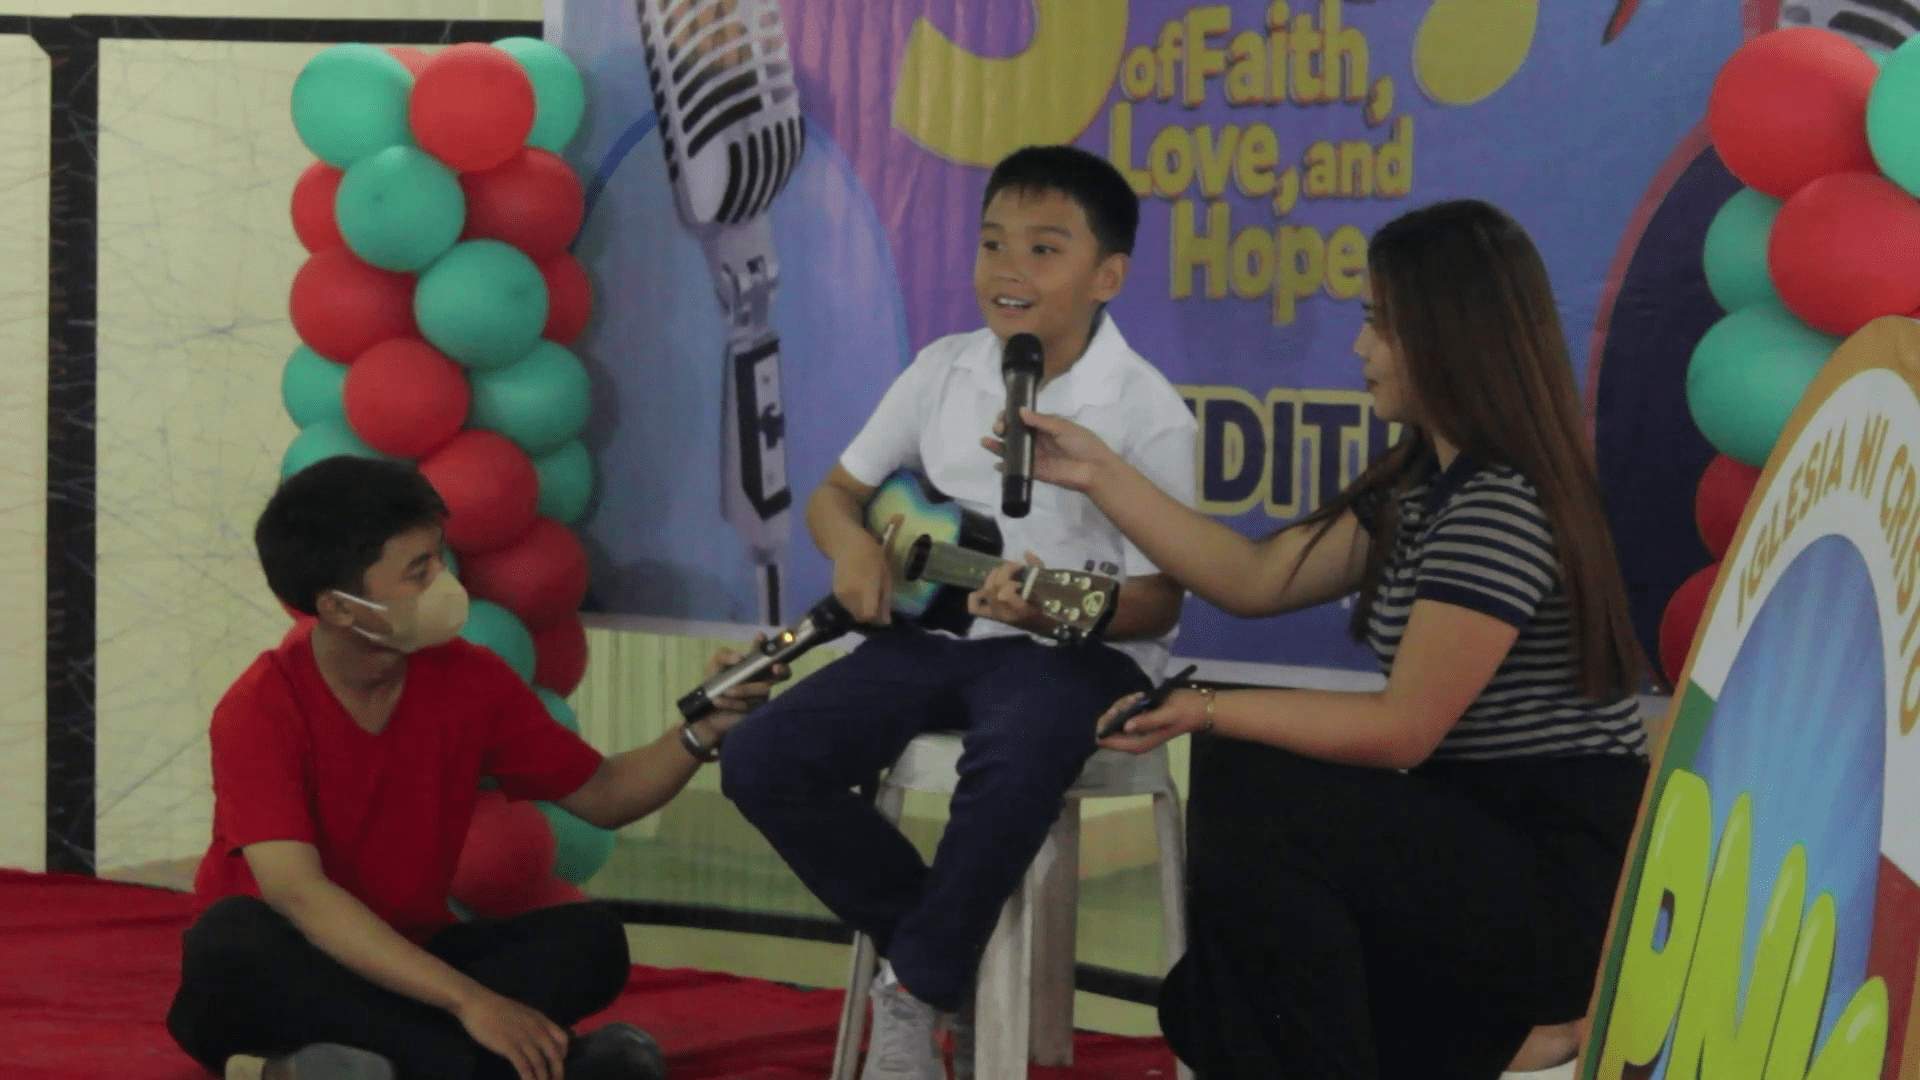 SOFLAH district finals in Capas, Tarlac recognize children’s singing prowess